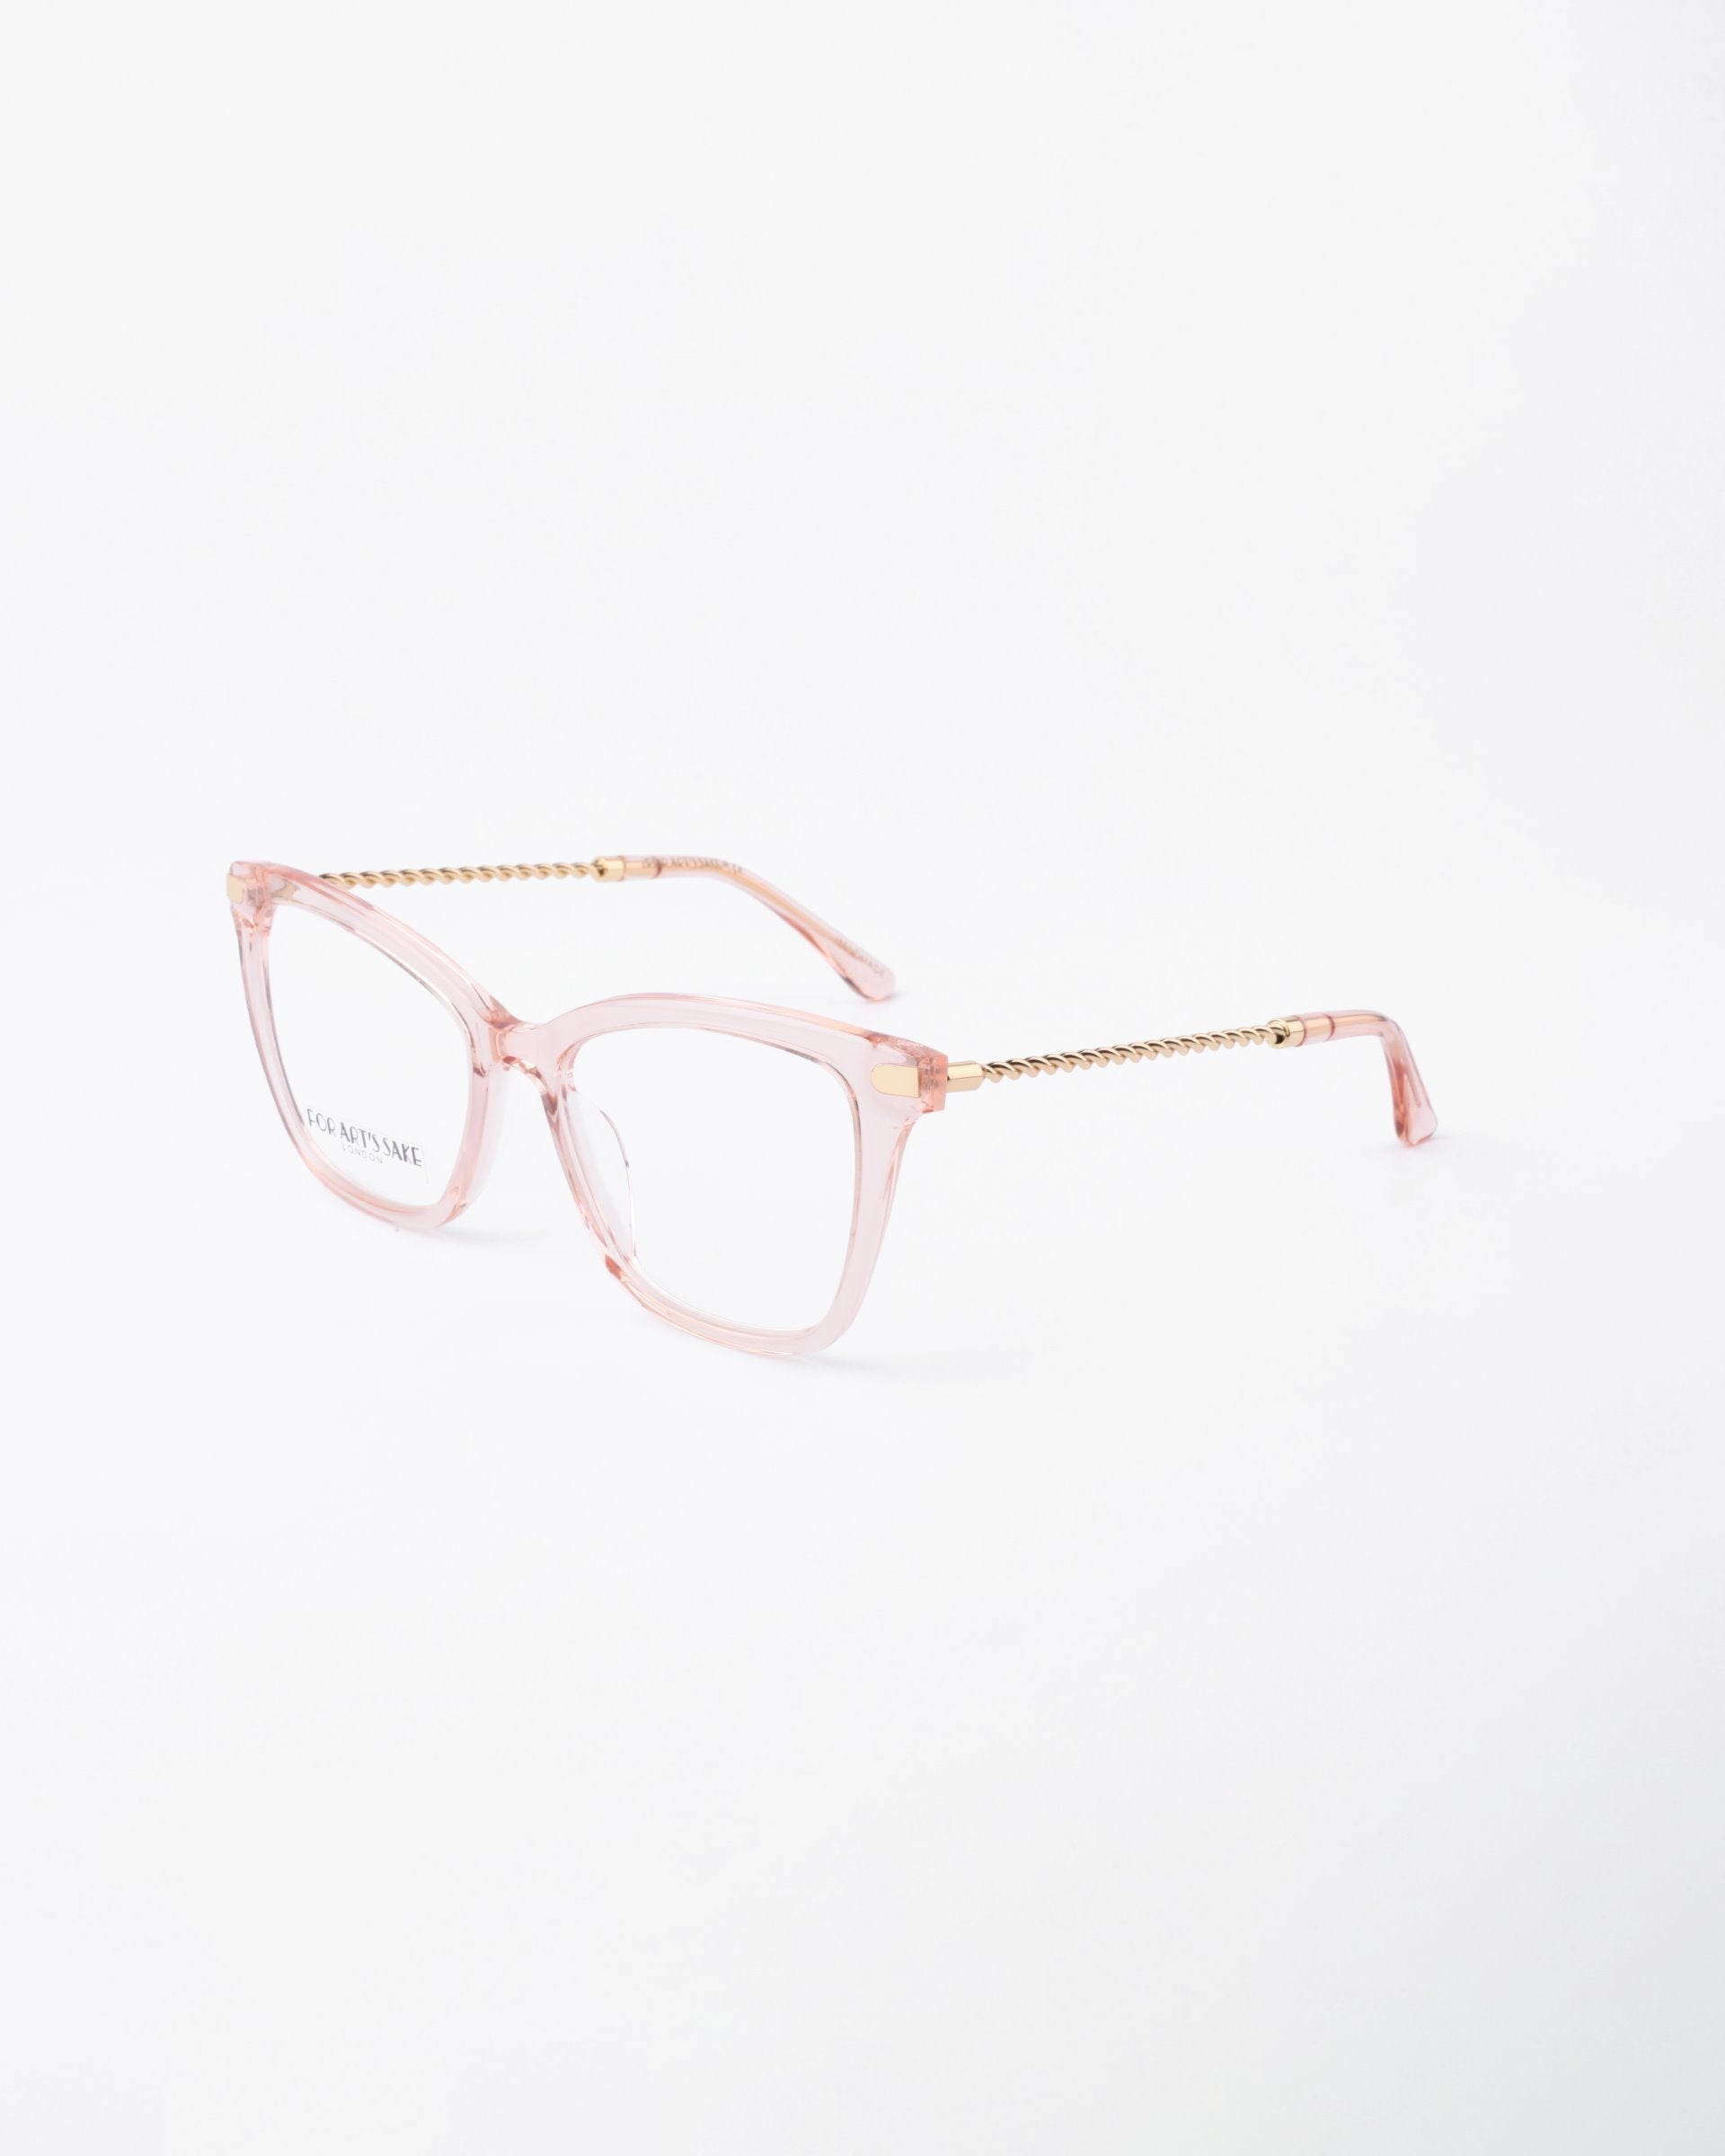 A pair of stylish eyeglasses with clear pink square frames and gold temple arms, featuring a textured design. With UV protection and a blue light filter, the Paris Two by For Art&#39;s Sake® are perfect for both fashion and function. The glasses are displayed on a white background.